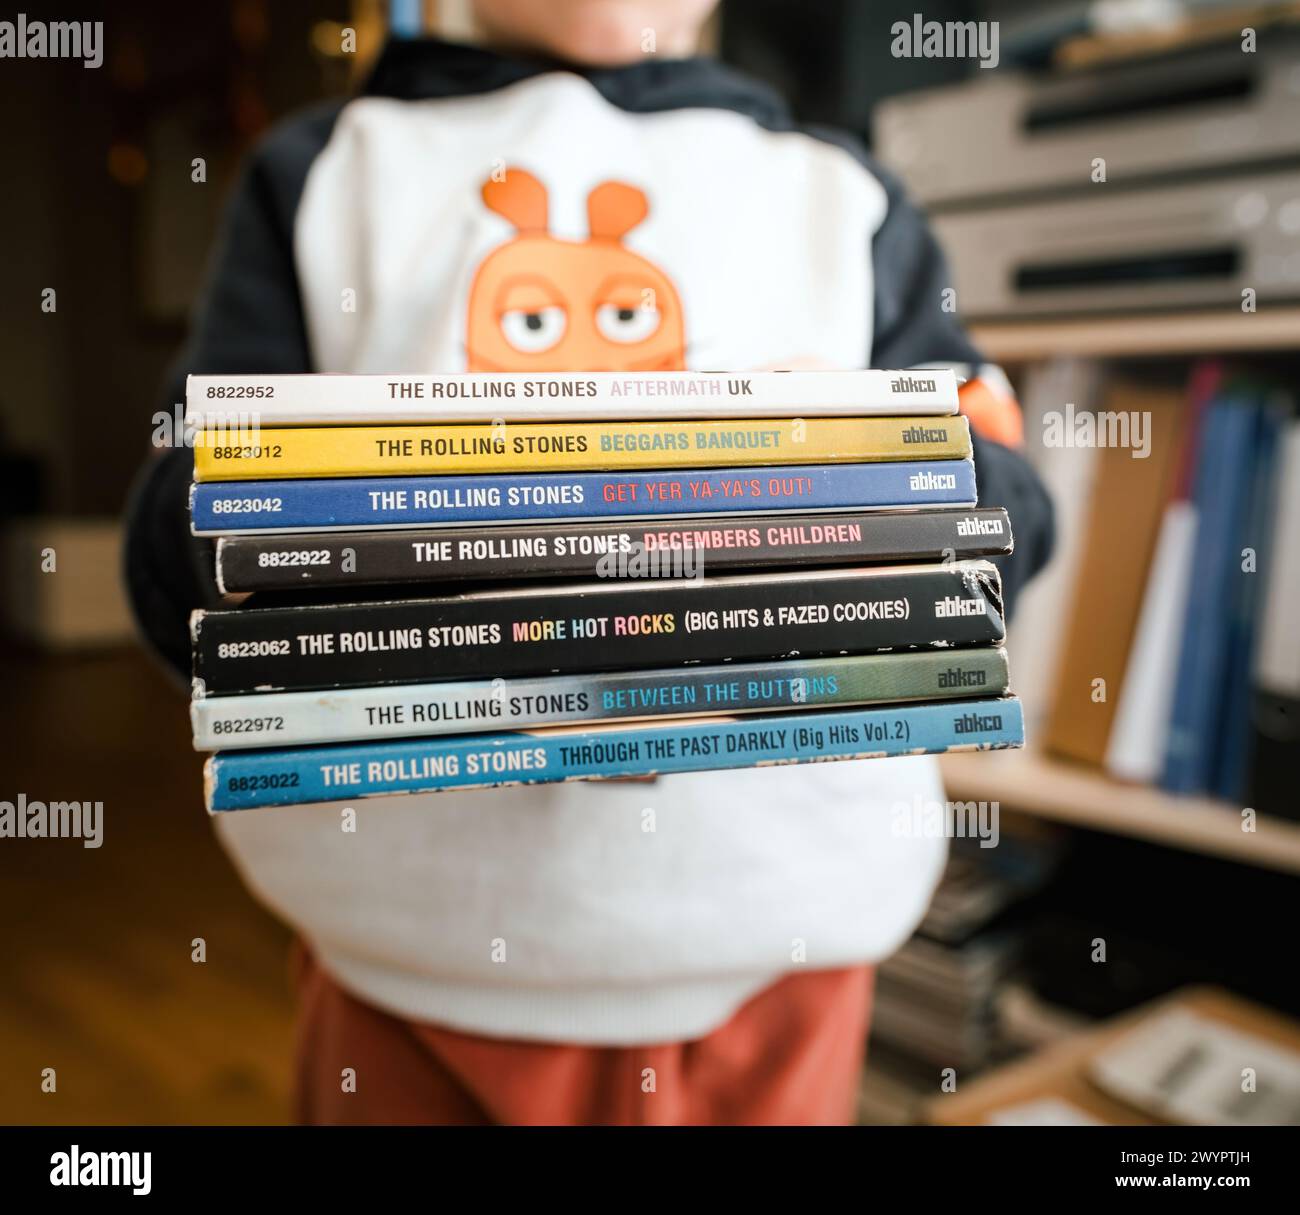 Frankfurt, Germany - Jan 12, 2024: A small child holds a stack of The Rolling Stones albums, partially obscuring their face, in a charming display of early music appreciation. Stock Photo